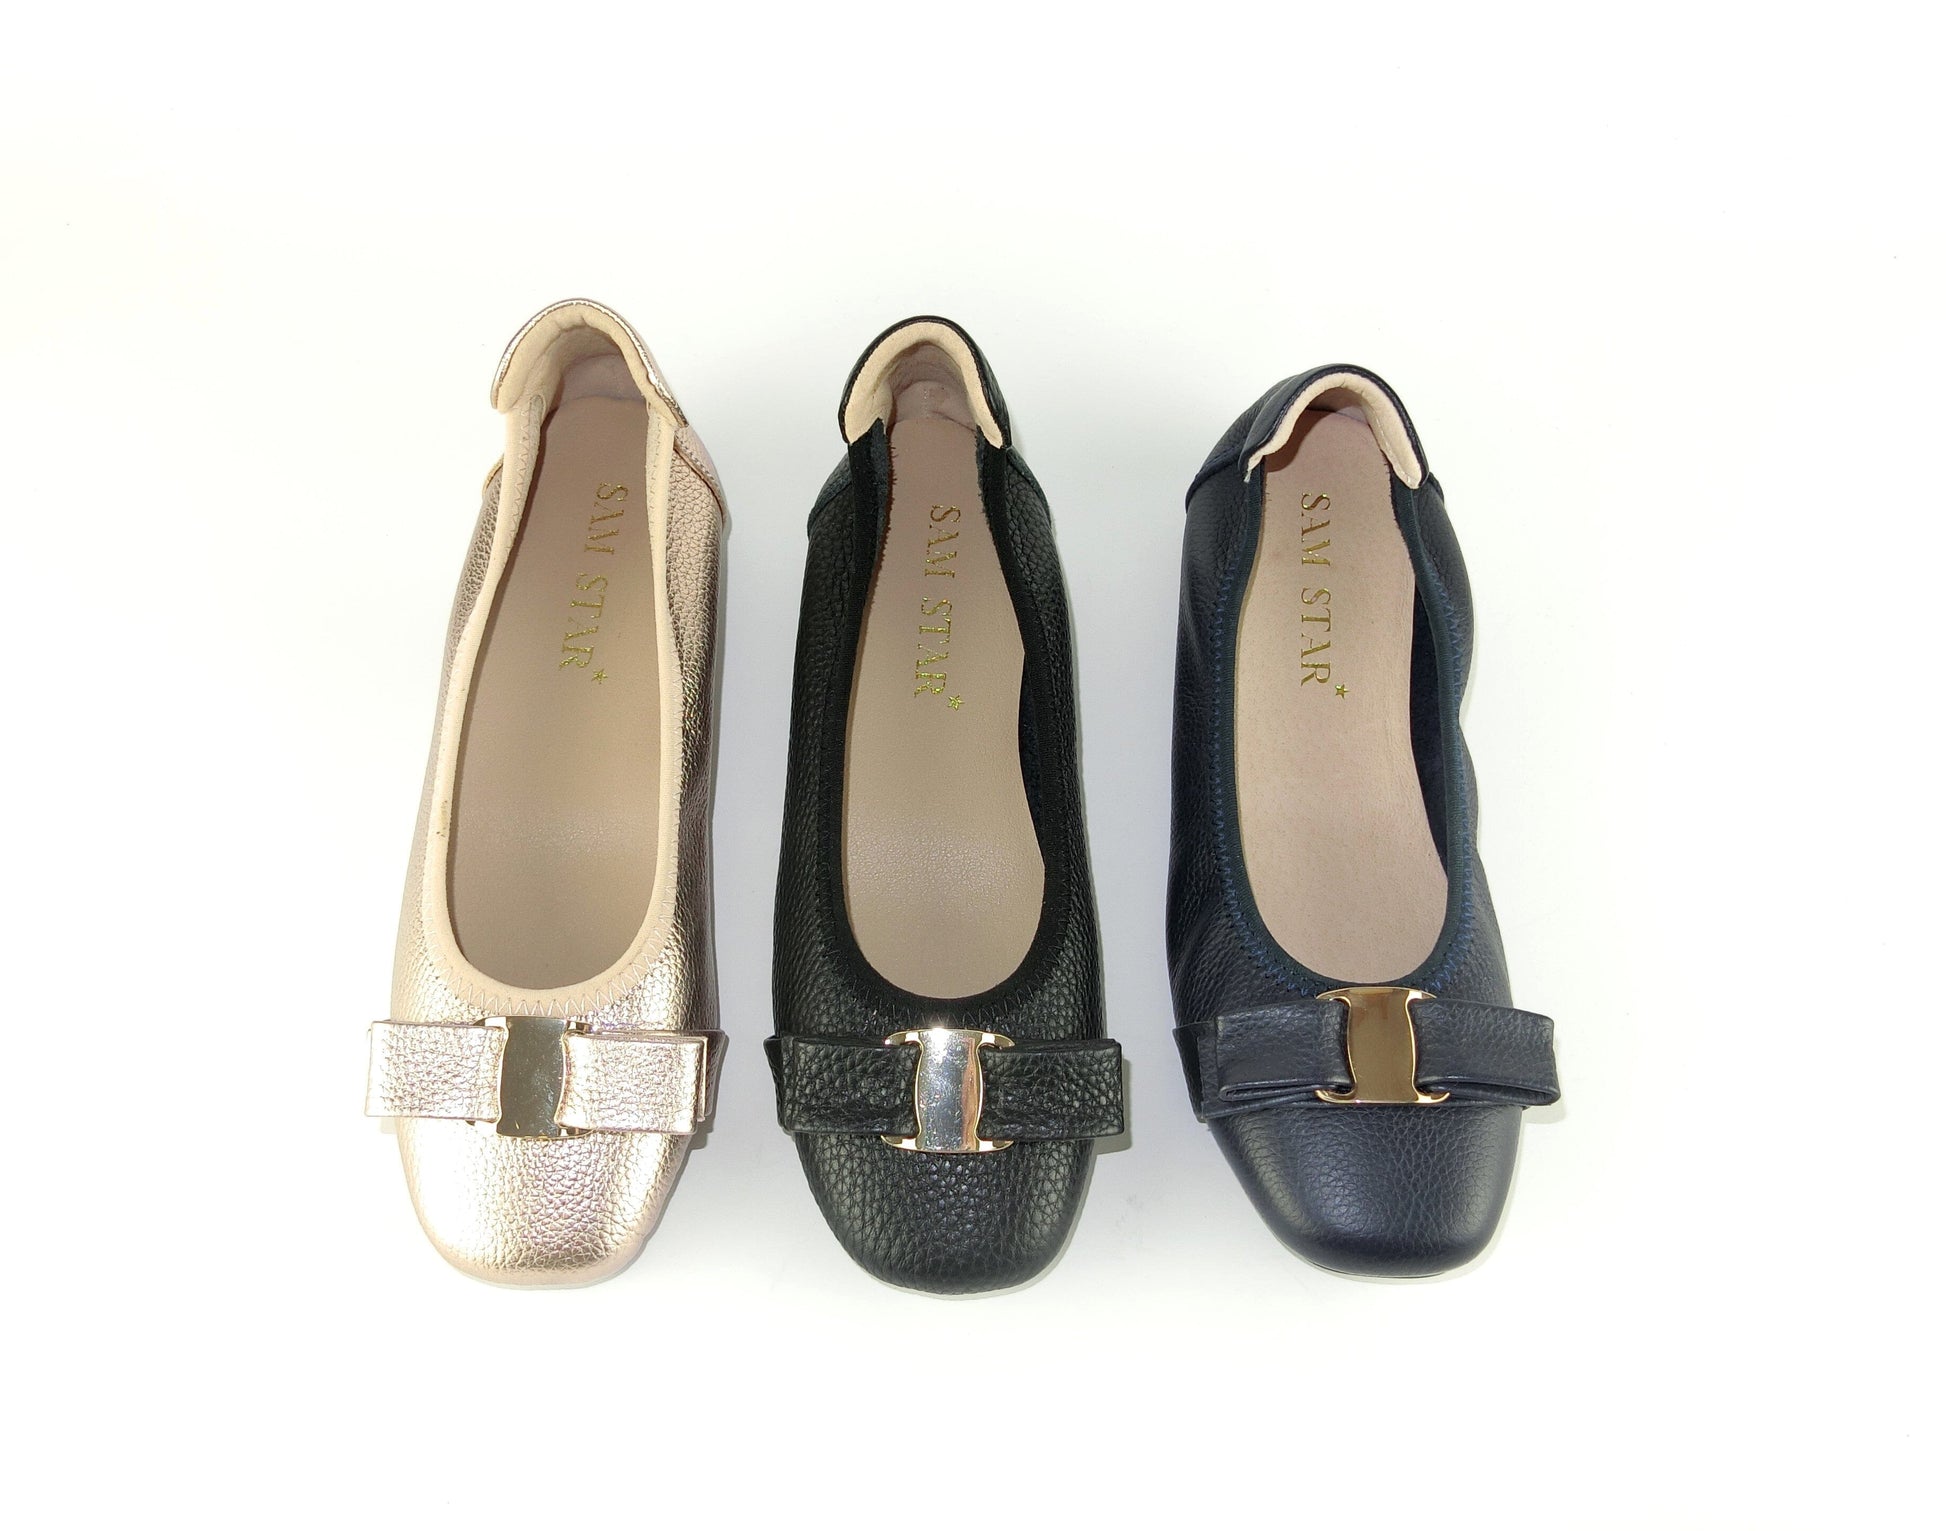 163-13 Leather pumps with gold buckle ( SALE ) Pumps Sam Star shoes 